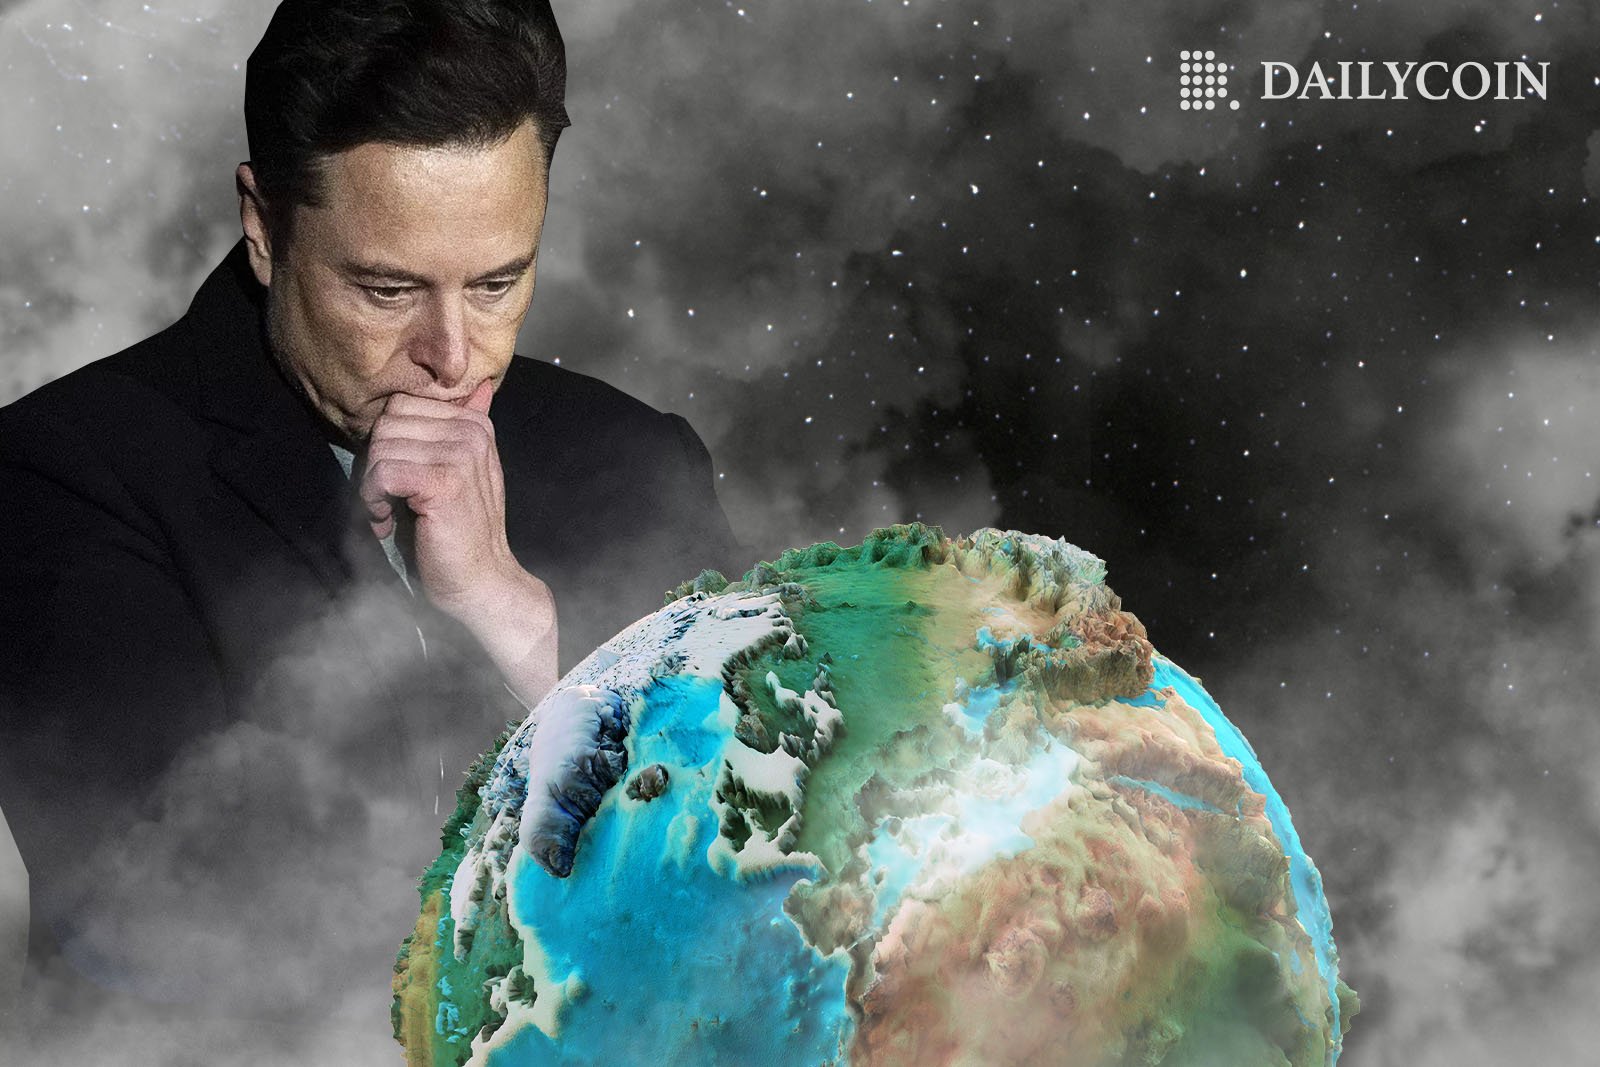 Elon Musk is gazing at the green and blue Planet Earth, thinking what stunt to pull next